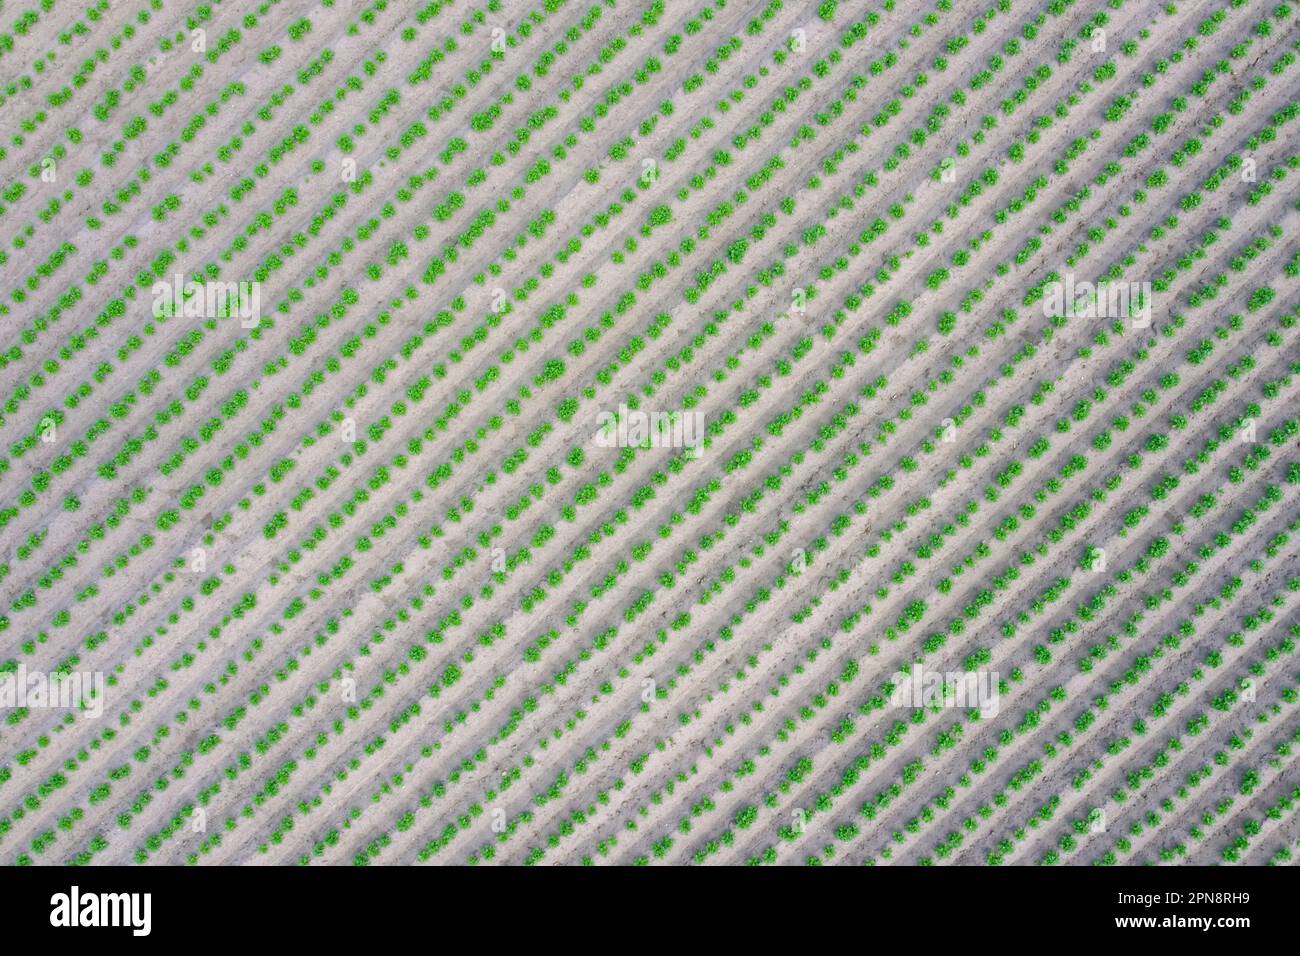 Aerial view over rows of green shoots of potato plants (Solanum tuberosum), root vegetables in potato field in spring Stock Photo